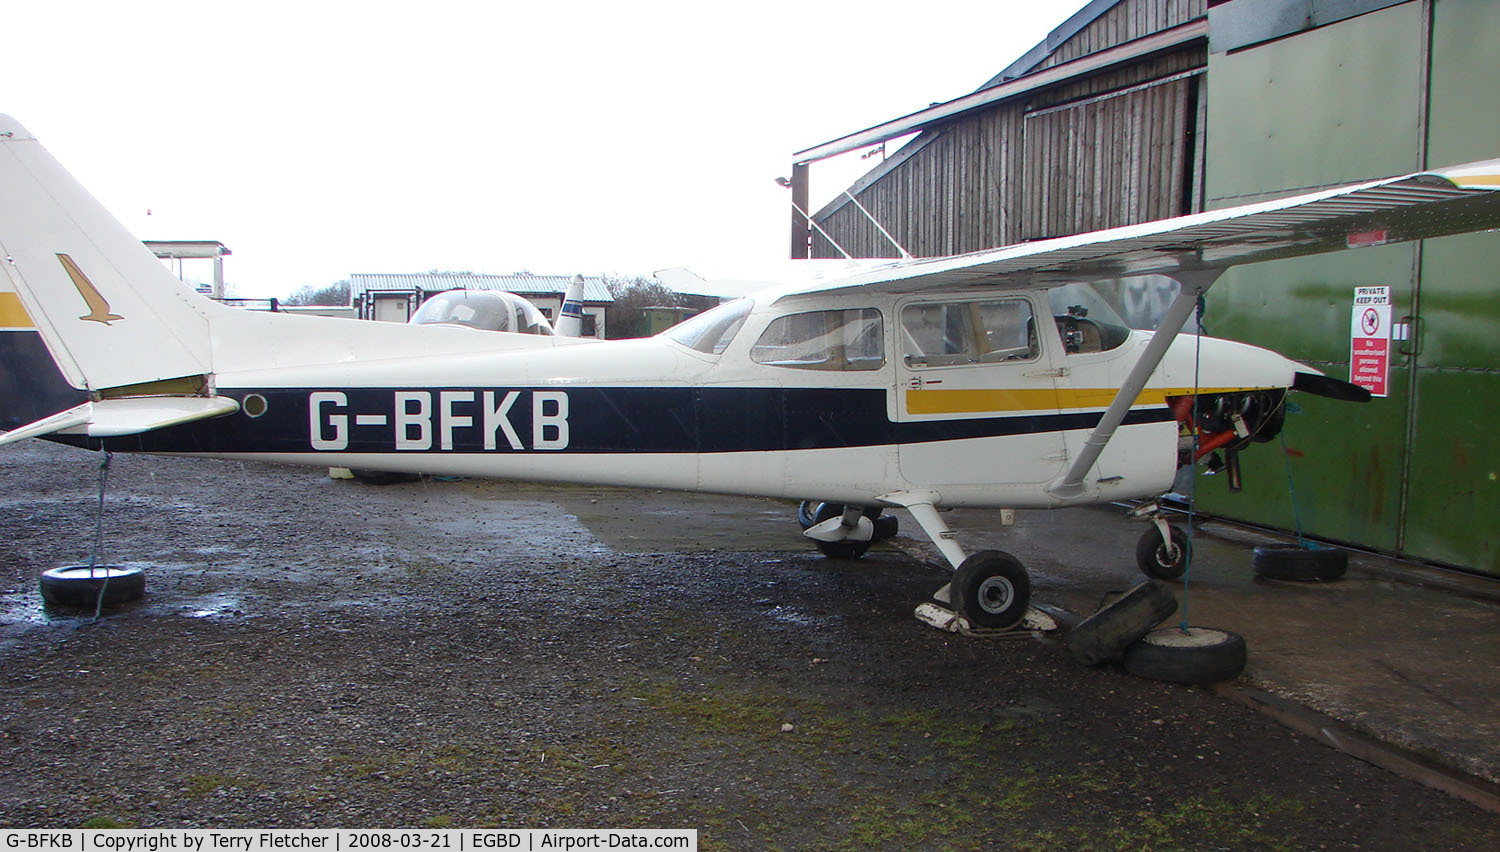 G-BFKB, 1977 Reims F172N Skyhawk C/N 1601, Cessna F172N at Derby Eggington  - a visitor from its base at Sleap airfield